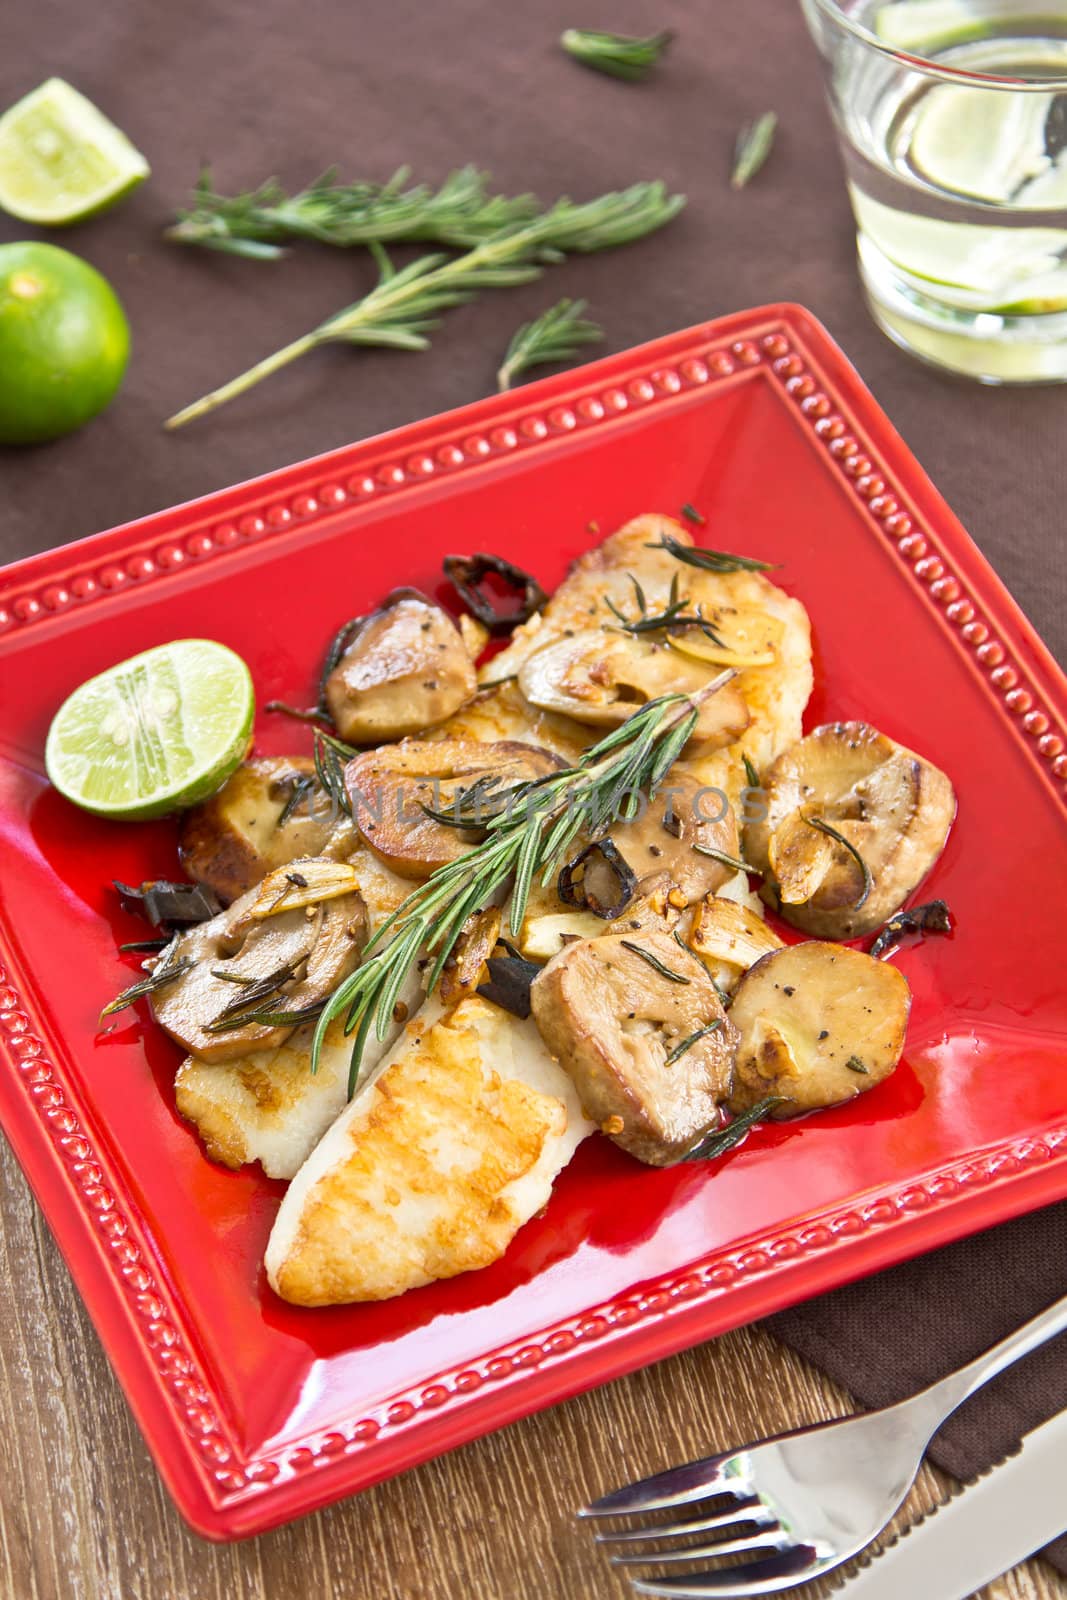 Grilled Dory fish with mushroom sautéed by vanillaechoes